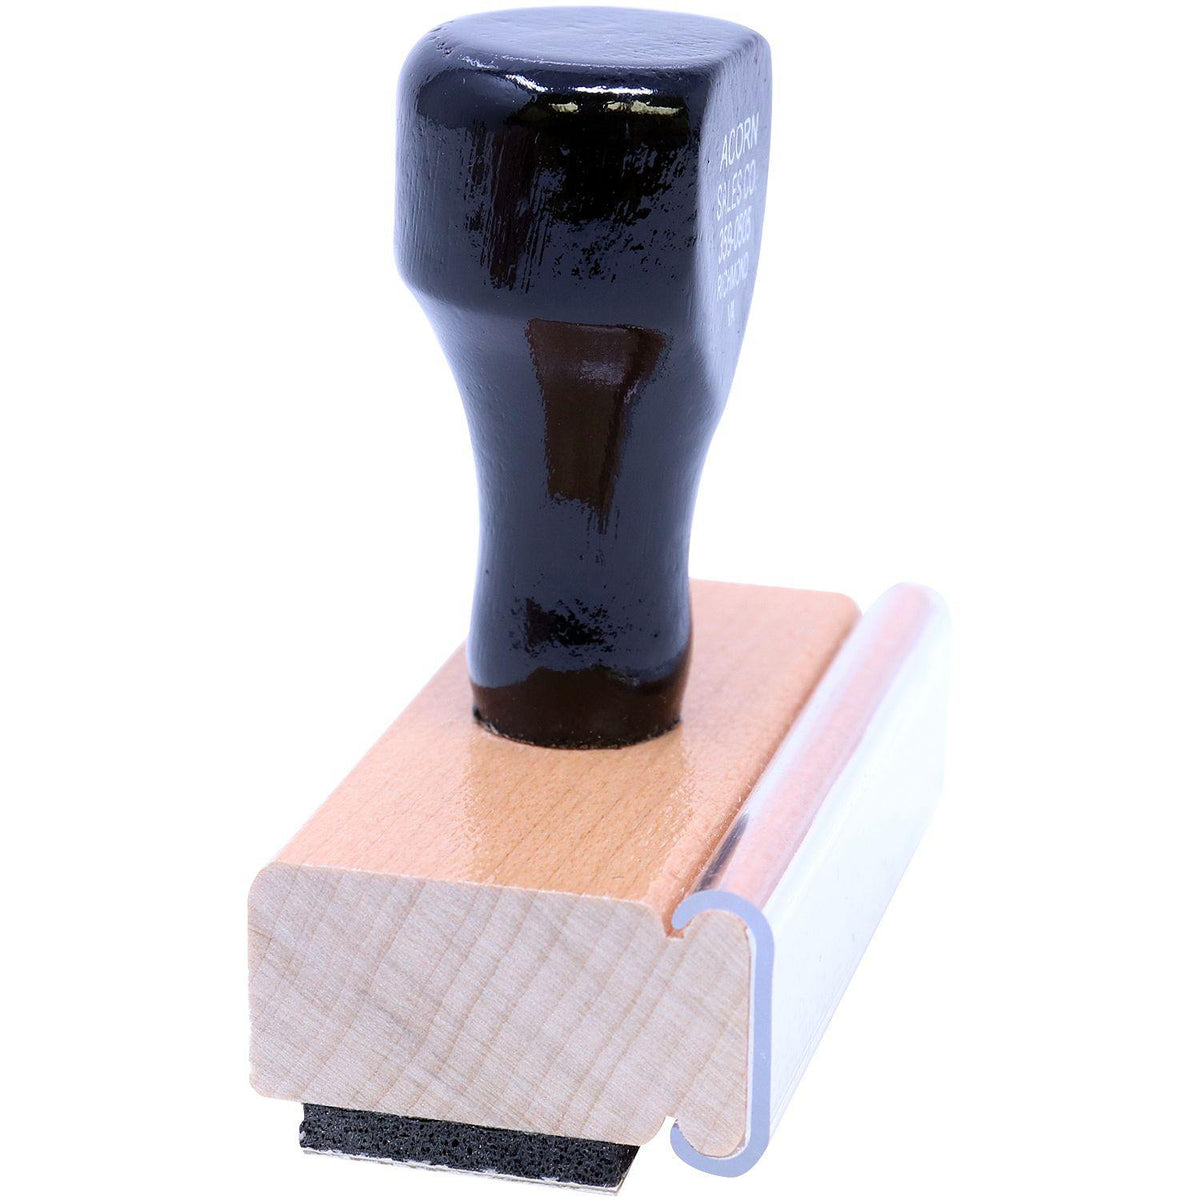 Side View of Economy Rate Rubber Stamp at an Angle